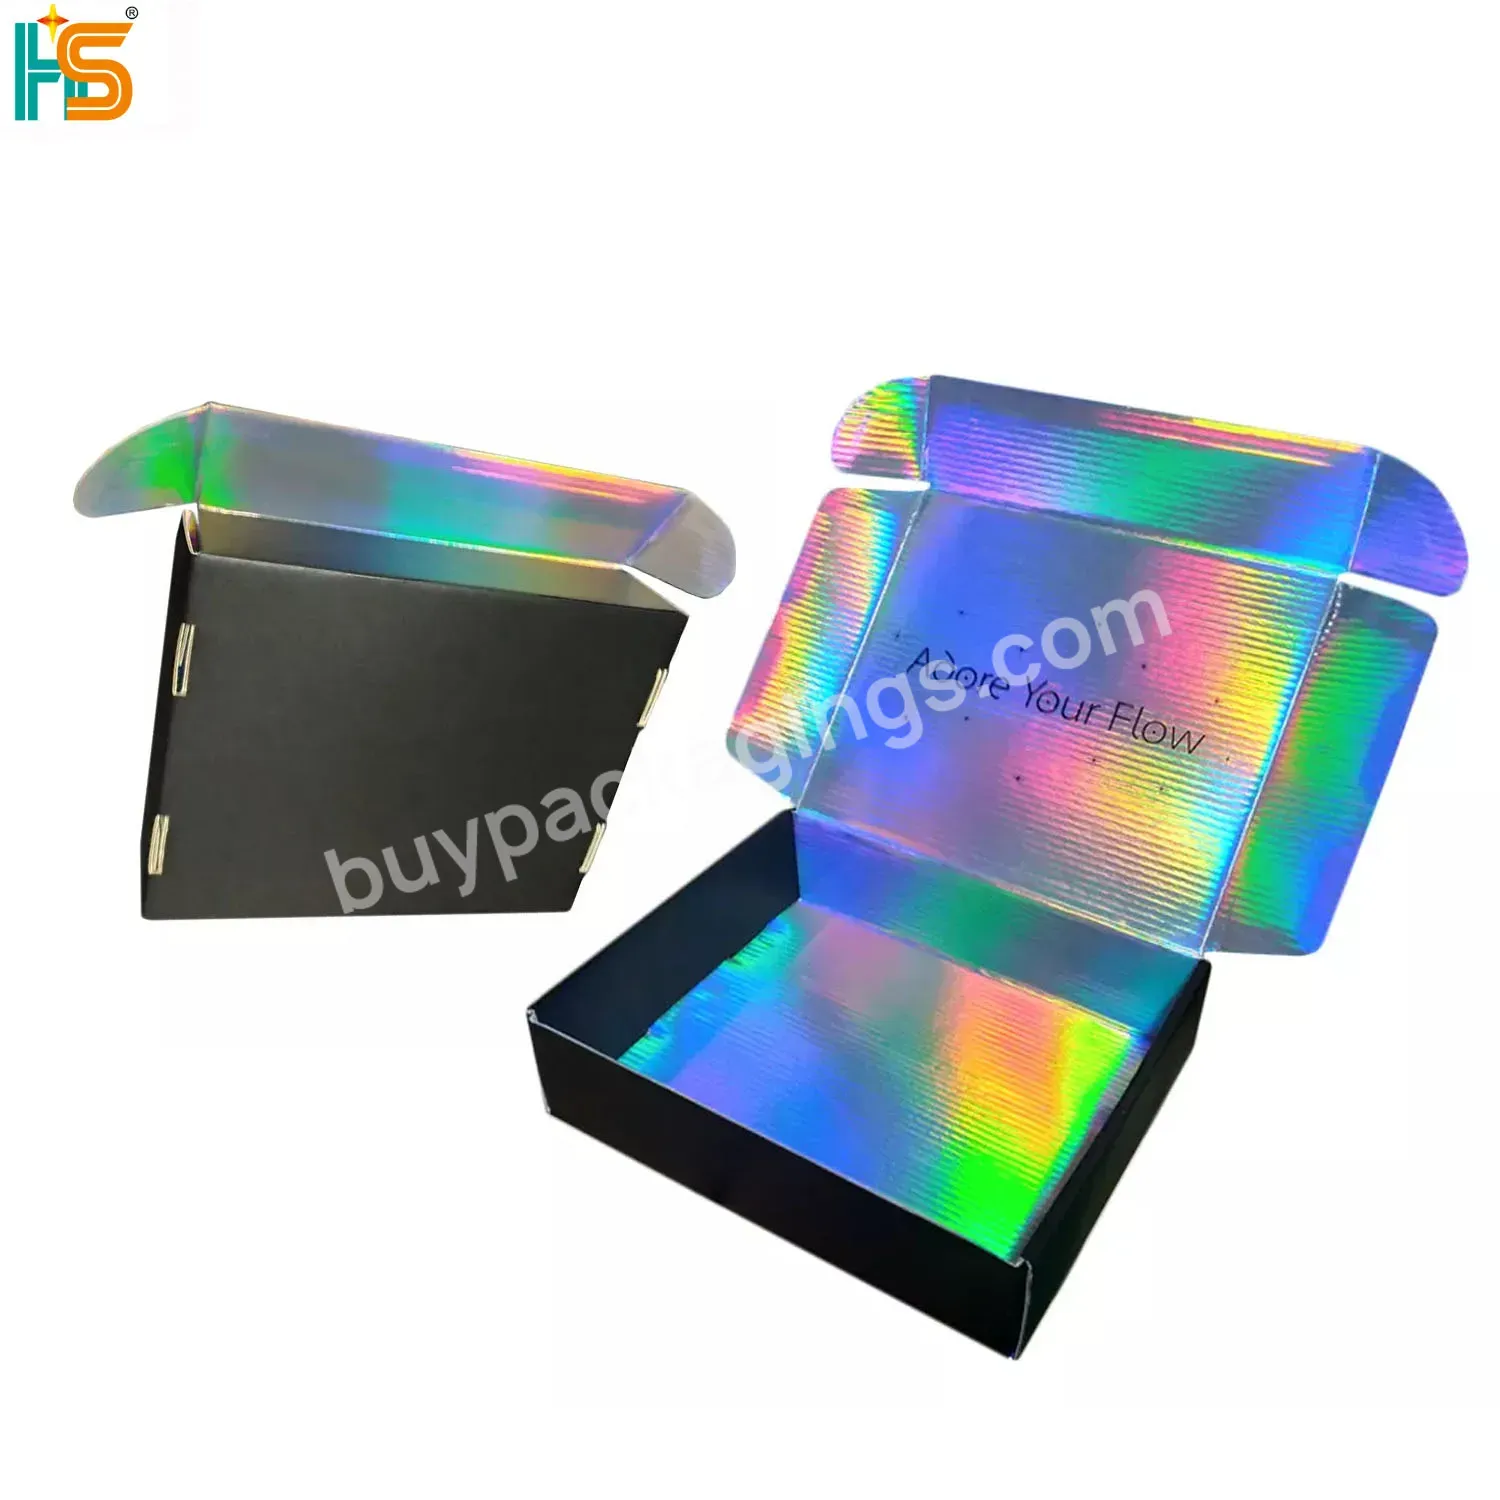 Hot Trending Skincare / Beauty / Cloth Pink Delivery Mailing Packaging Box Custom Holographic Mailer Box For Shipping